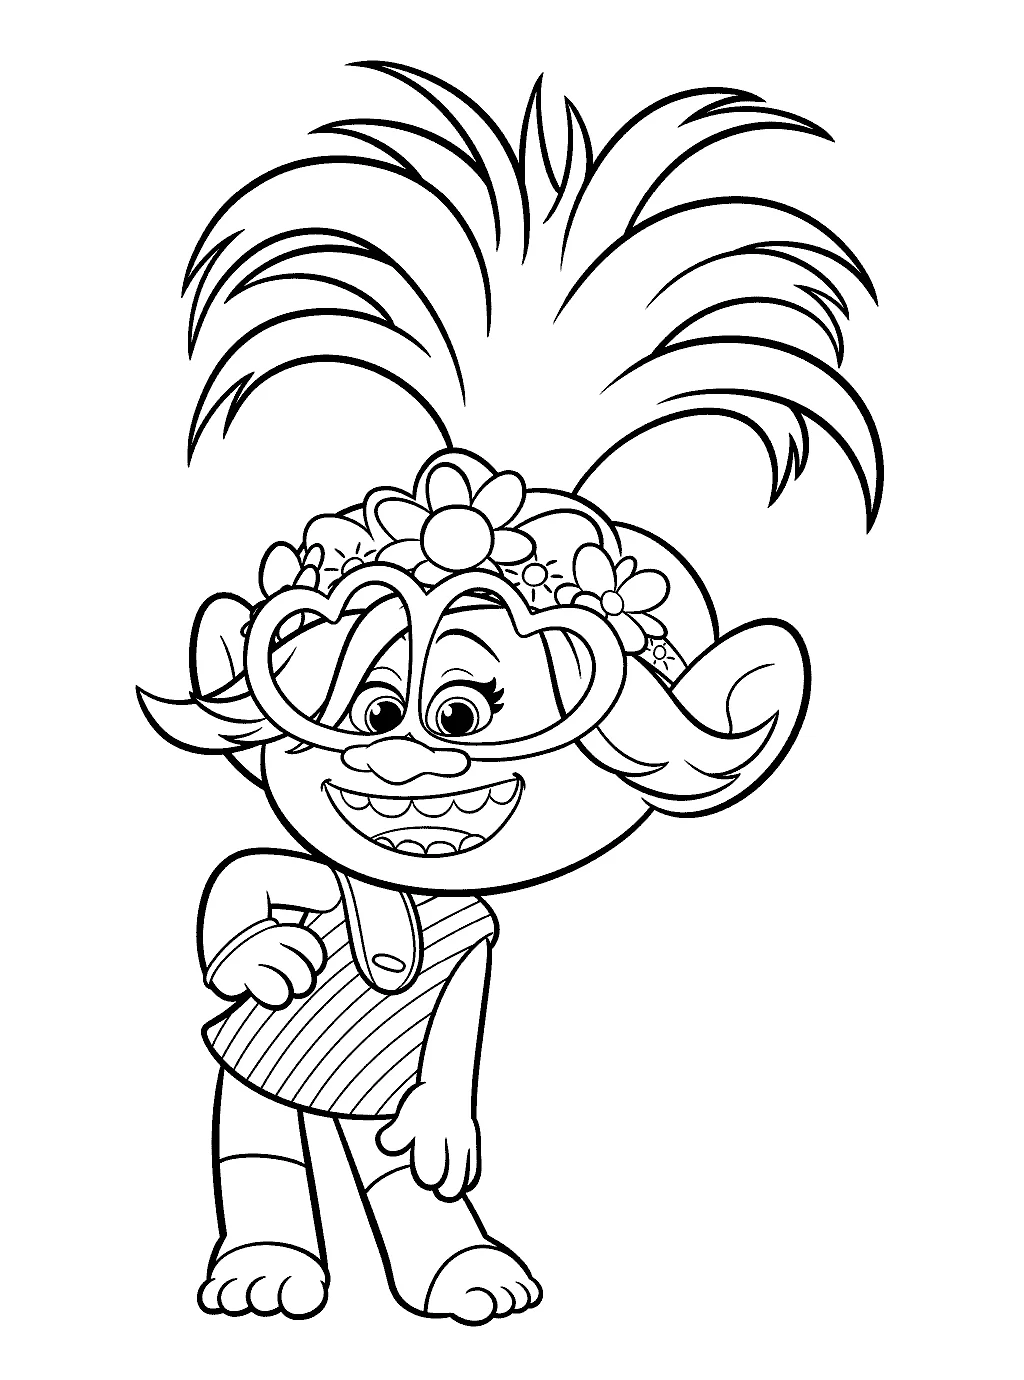 Poppy trolls world tour coloring pages